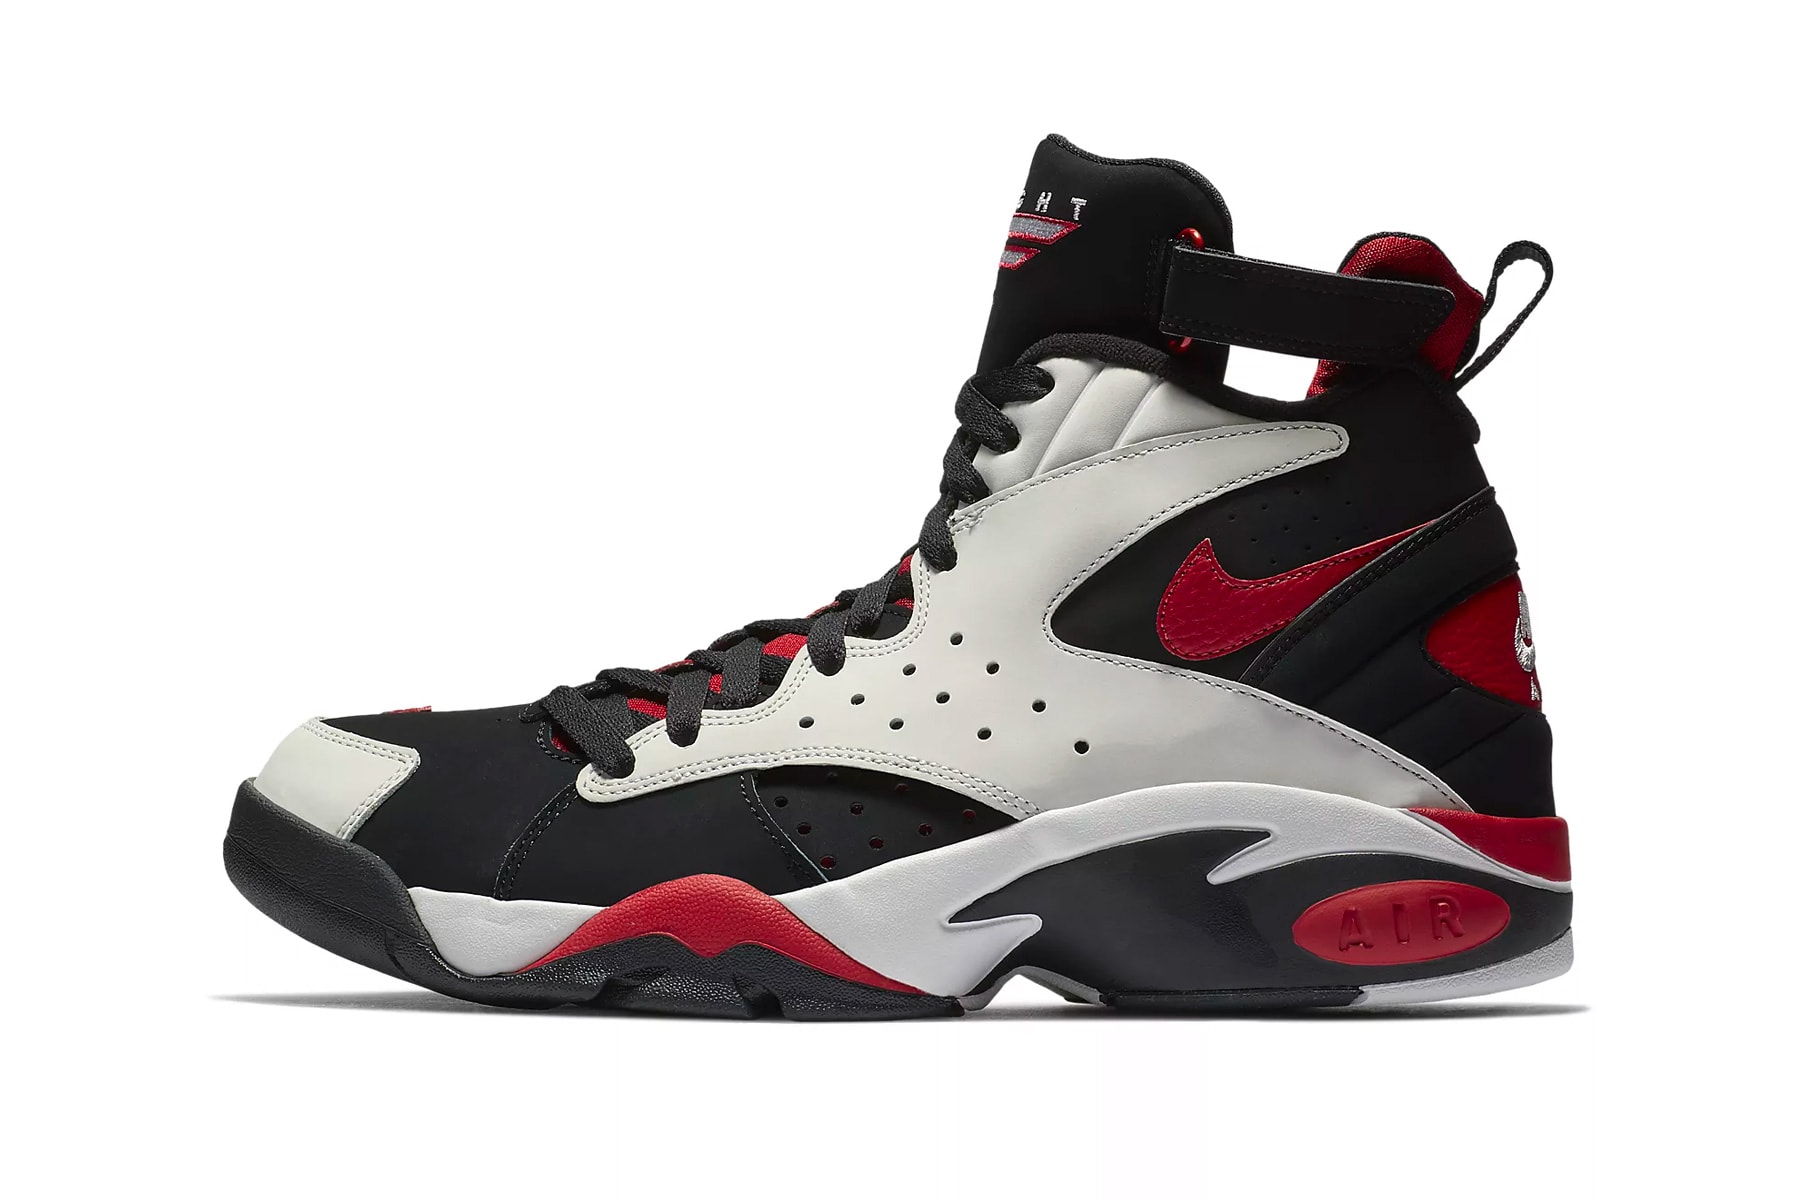 Nike Air Maestro II LTD "Gym Red" Available Now release date sneaker scottie pippen basketball 